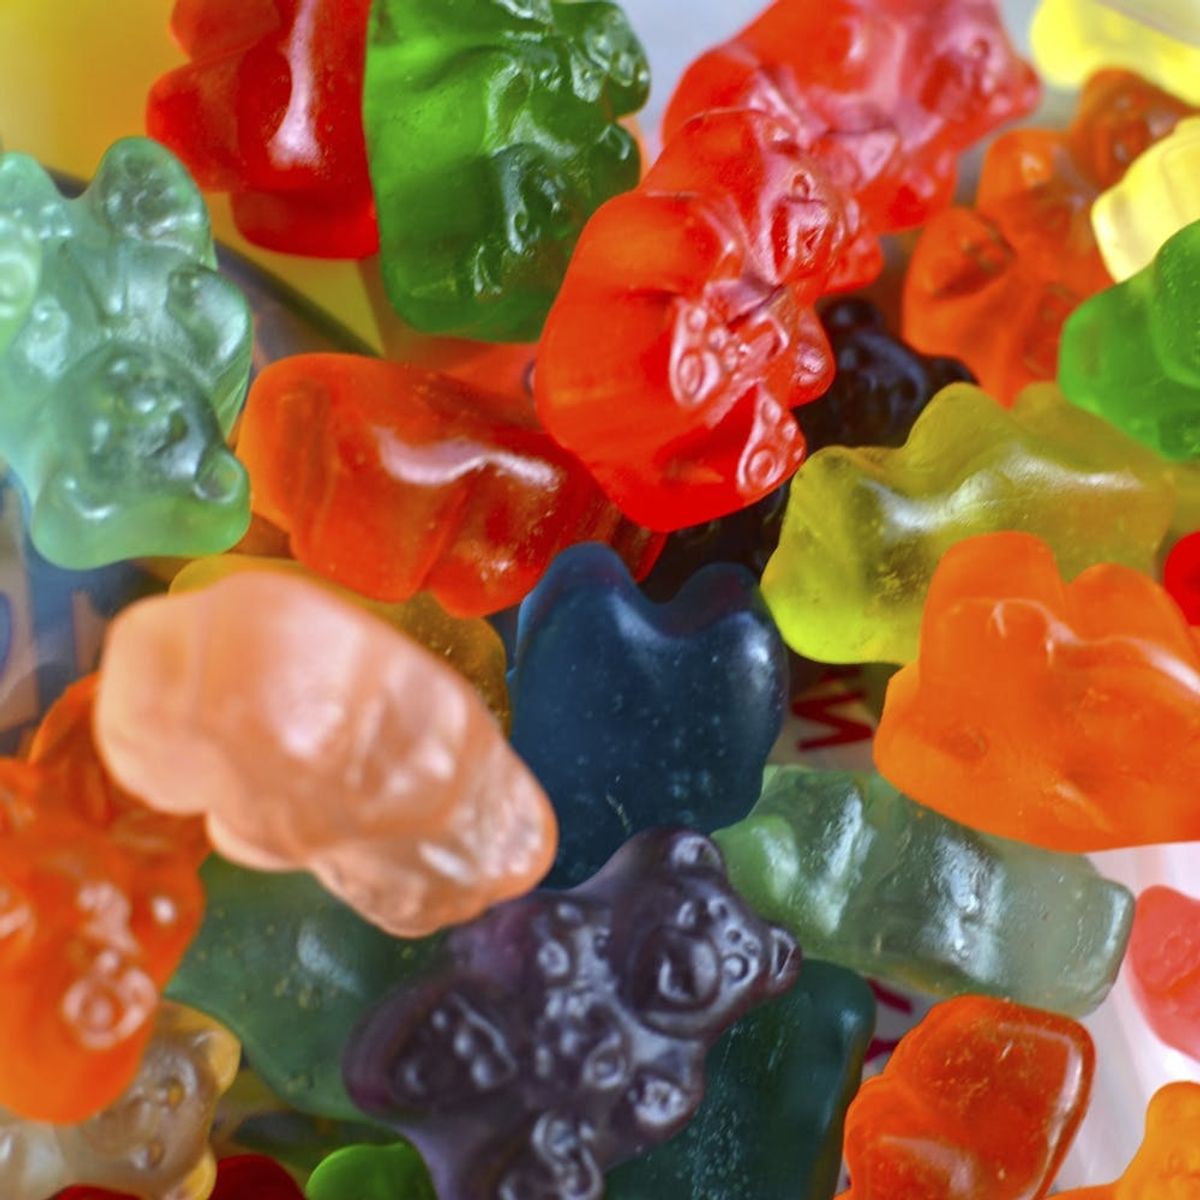 Check Out This Super Simple Way to Make Champagne Gummy Bears